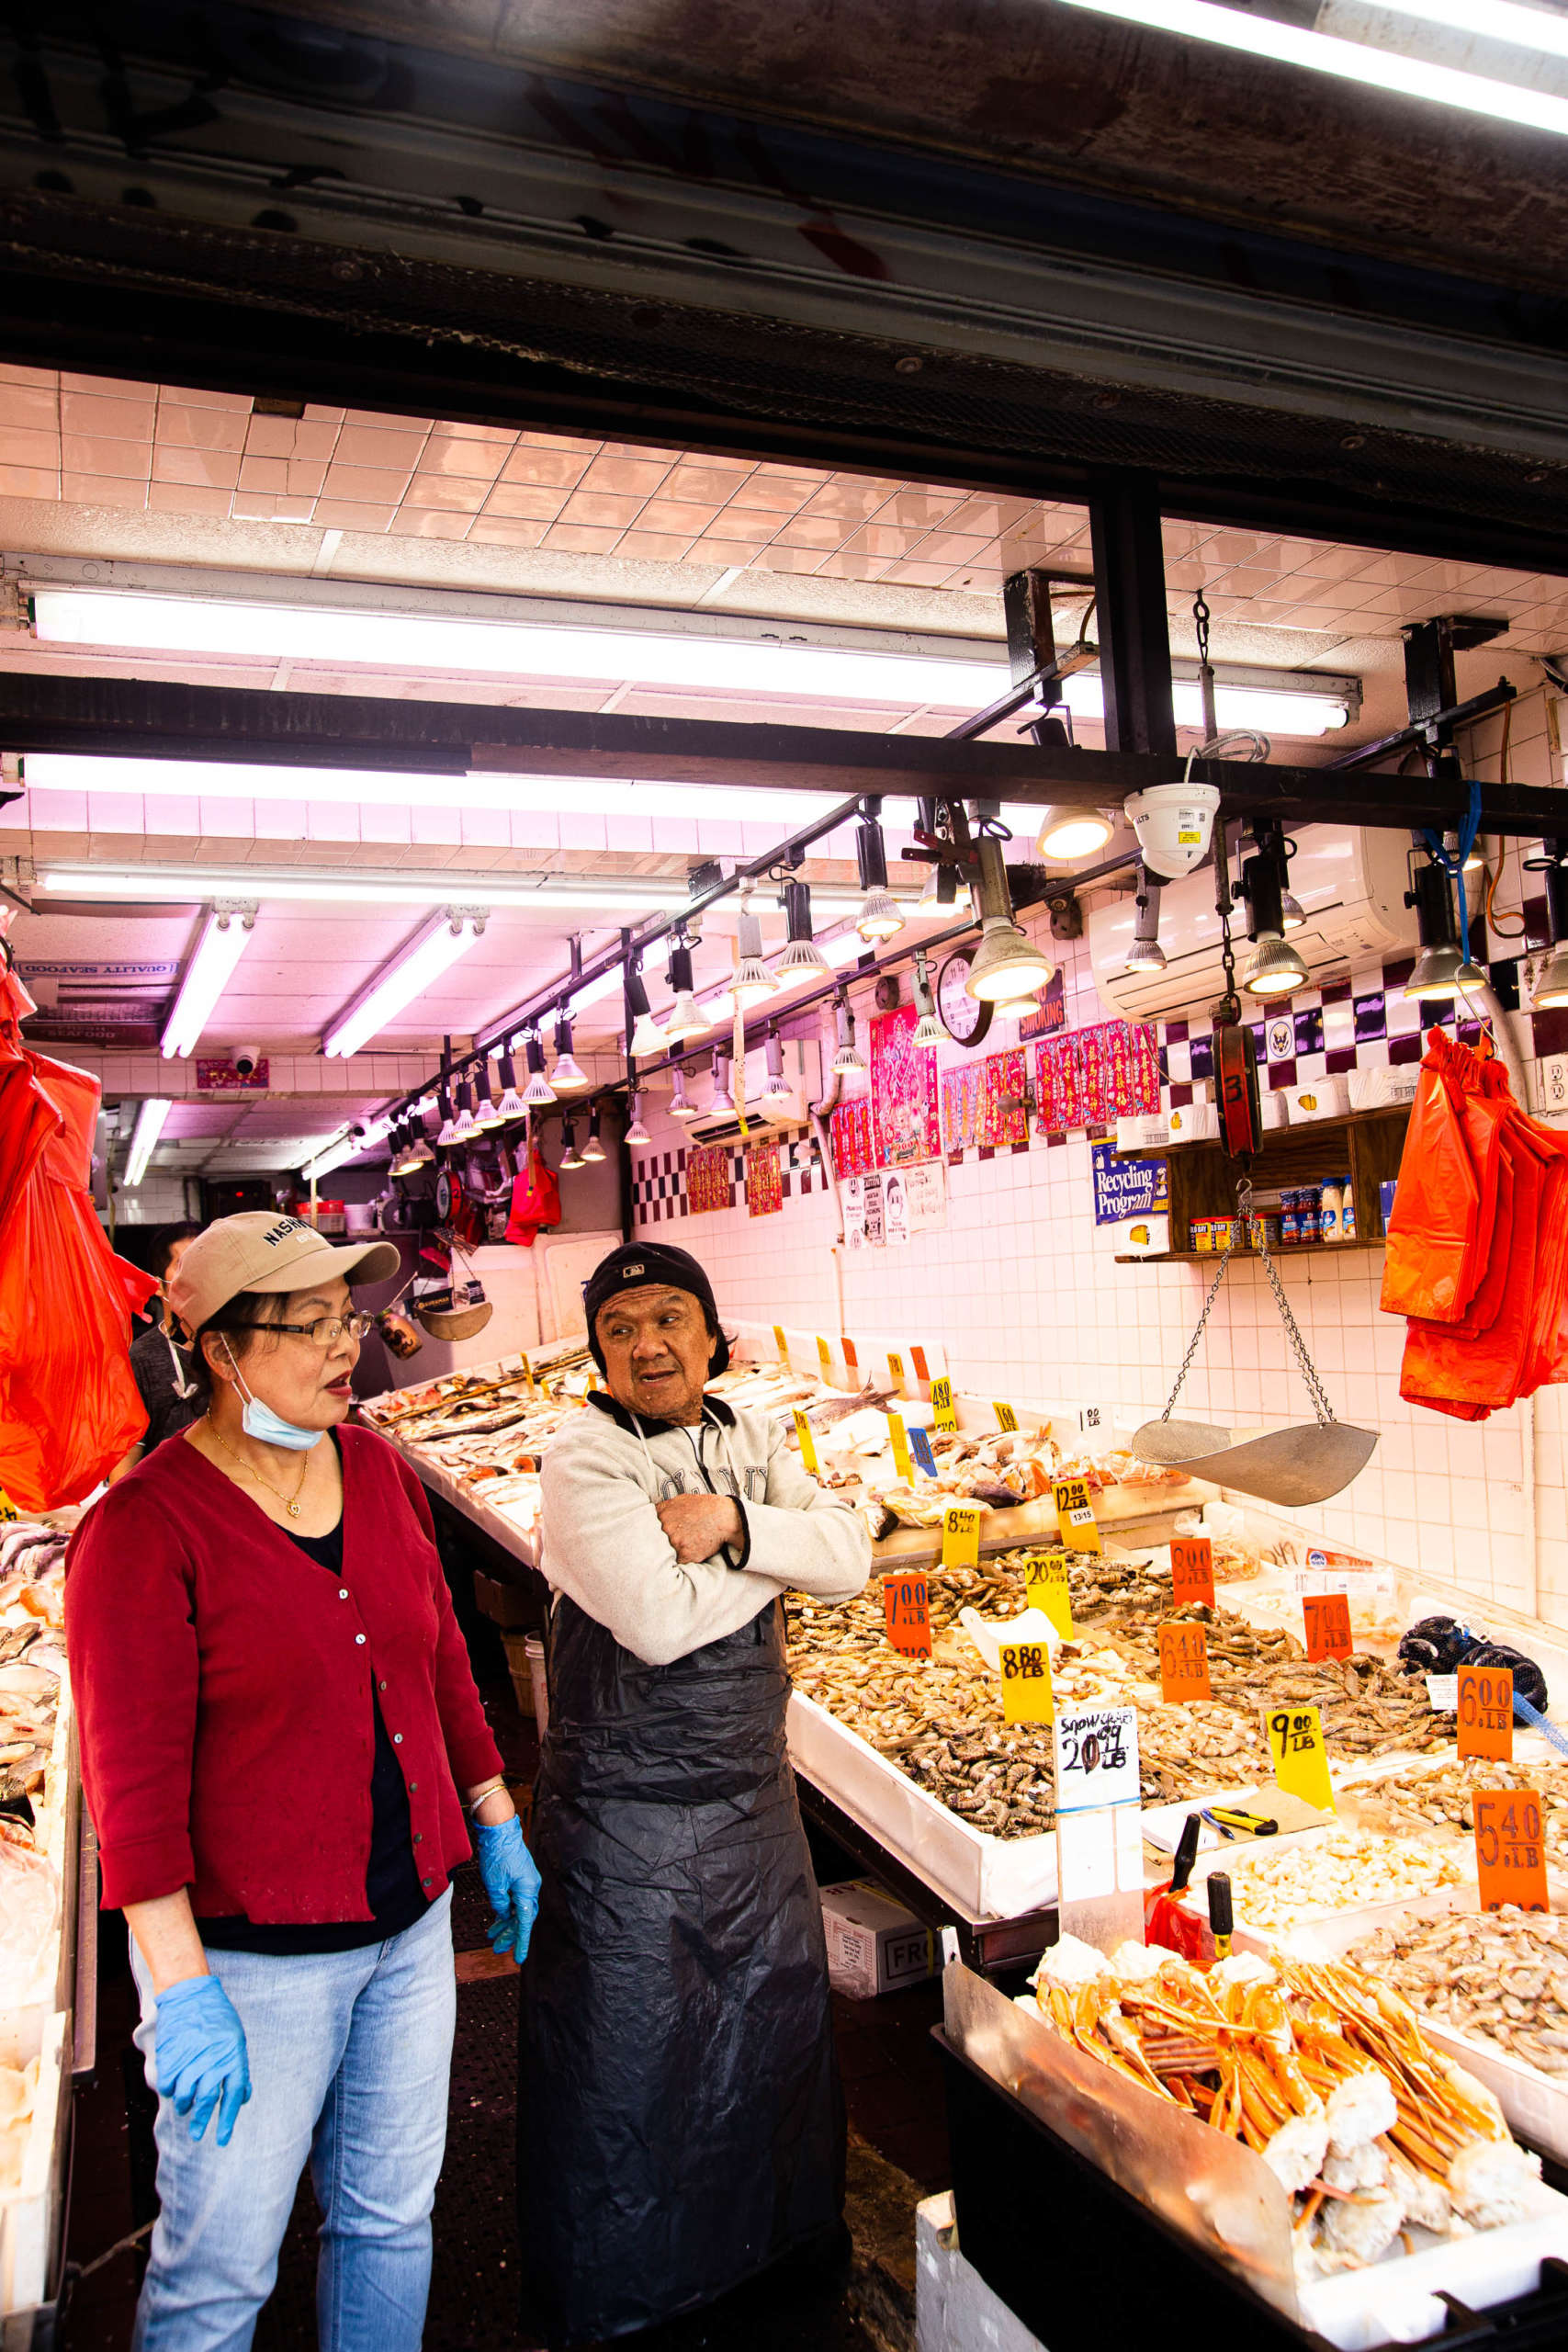 Two people standing in a seafood store, talking to each other. There are trays of seafood displayed all around them with orange and yellow price tags, and orange bags hanging above them.